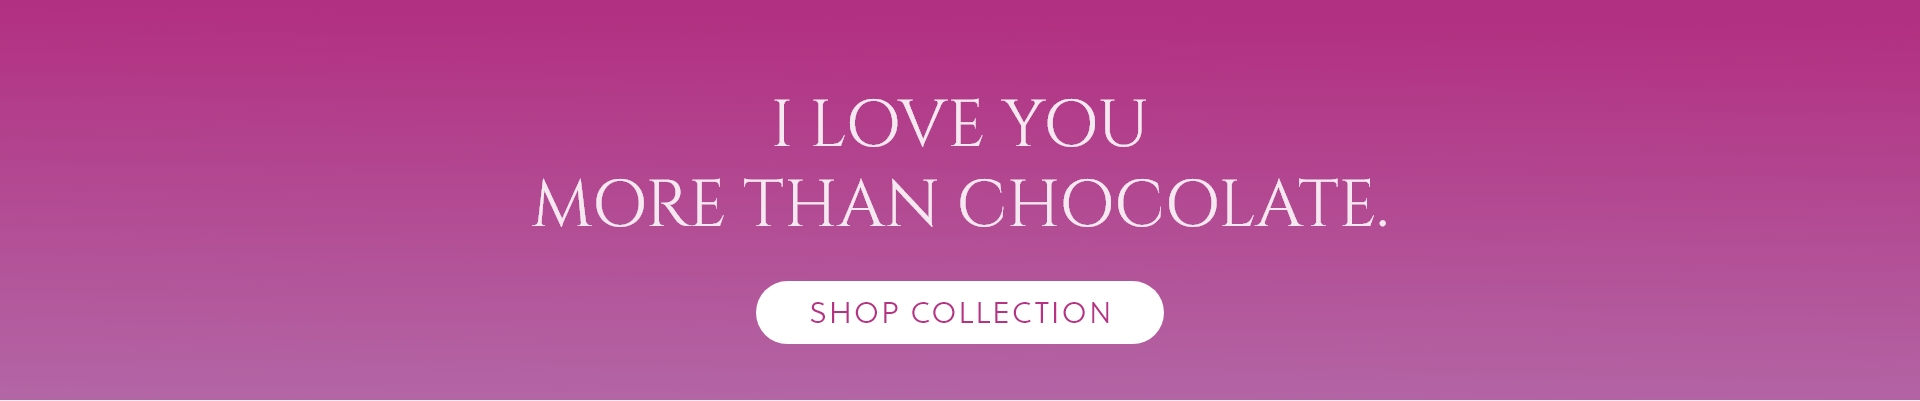 I_love_you_more_then_chocolate_desktop